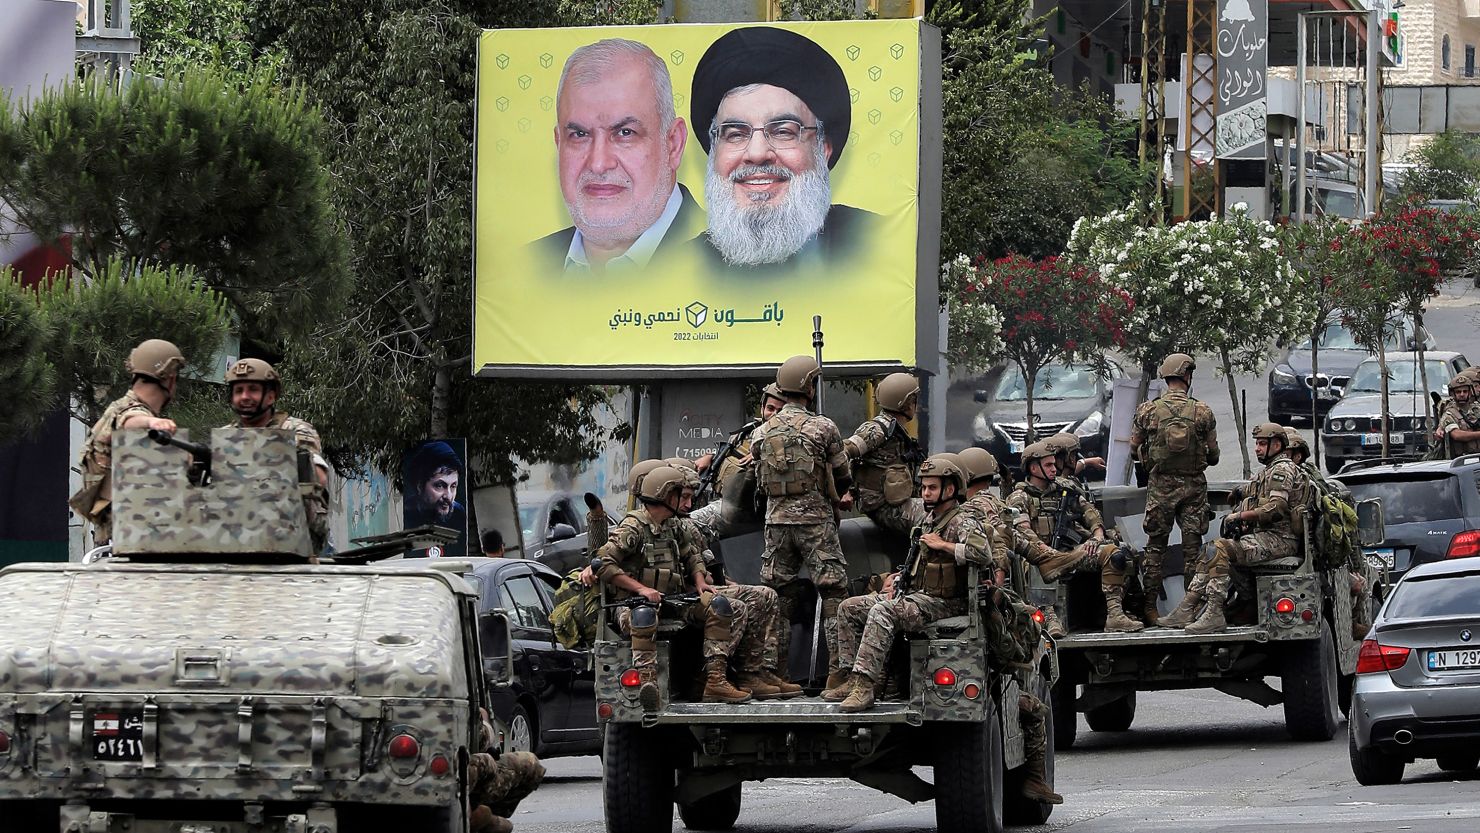 Lebanese army vehicles drive past a sign showing the images of the leader of Hezbollah Hassan Nasrallah and the movement's parliamentary candidate Mohammed Fneish, along a road in the city of Nabatiyeh, on May 15. 